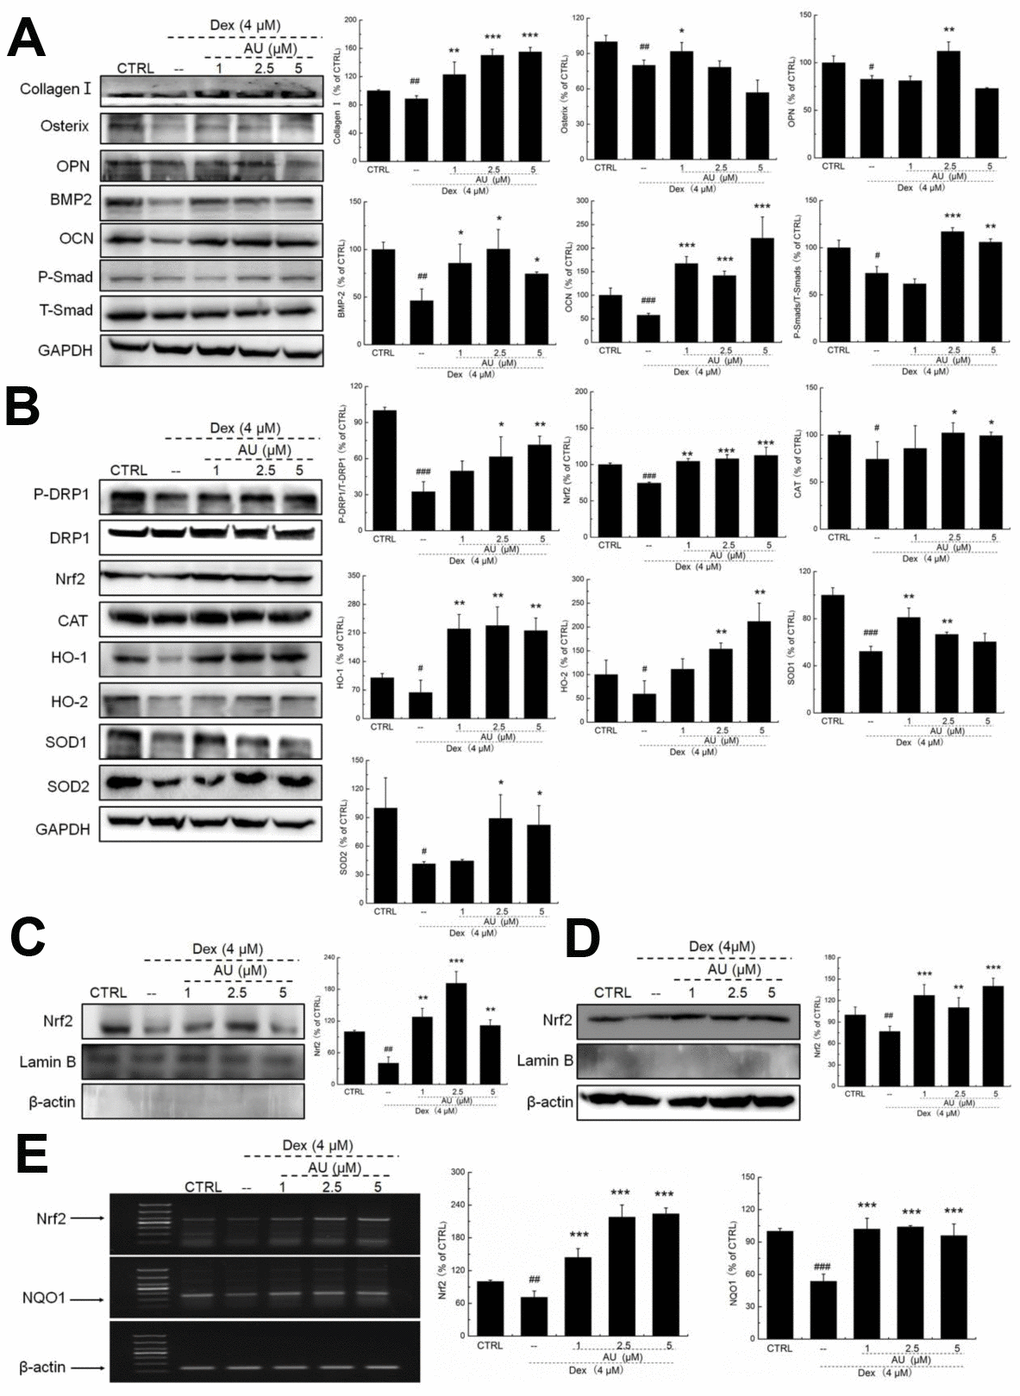 AU protected the Dex-caused MG63 cells apoptosis via regulation the Nrf2/HO-1 signaling. (A) AU up-regulated the expression levels of osteoblast differentiation related proteins including Osterix, OPN, BMP2, OCN and P-Smad in MG63 cells exposed to Dex. (B) AU increased the expression levels of proteins within the Nrf2/HO-1 signaling including P-DPR1, Nrf2, CAT, HO-1, HO-2, SOD-1 and SOD-2 in MG63 cells exposed to Dex. AU enhanced the expression levels of Nrf2 in both (C) nucleus and (D) cytoplasm of MG63 cells exposed to Dex. The quantification data of proteins were normalized by corresponding GAPDH and total proteins, respectively (n=4). (E) AU increased the mRNA levels of Nrf2 and NQO-1 in MG63 cells exposed to Dex. Marker size from top to bottom: 1000 bp, 700 bp, 500 bp, 400 bp, 300 bp, 200 bp and 100 bp. The data on quantified mRNA expression were normalized to the levels of β-actin (n=4). Data are expressed as mean ± S.D. and analyzed using a one-way ANOVA. # PPPvs. control cells, *PPPvs. Dex-exposed cells.